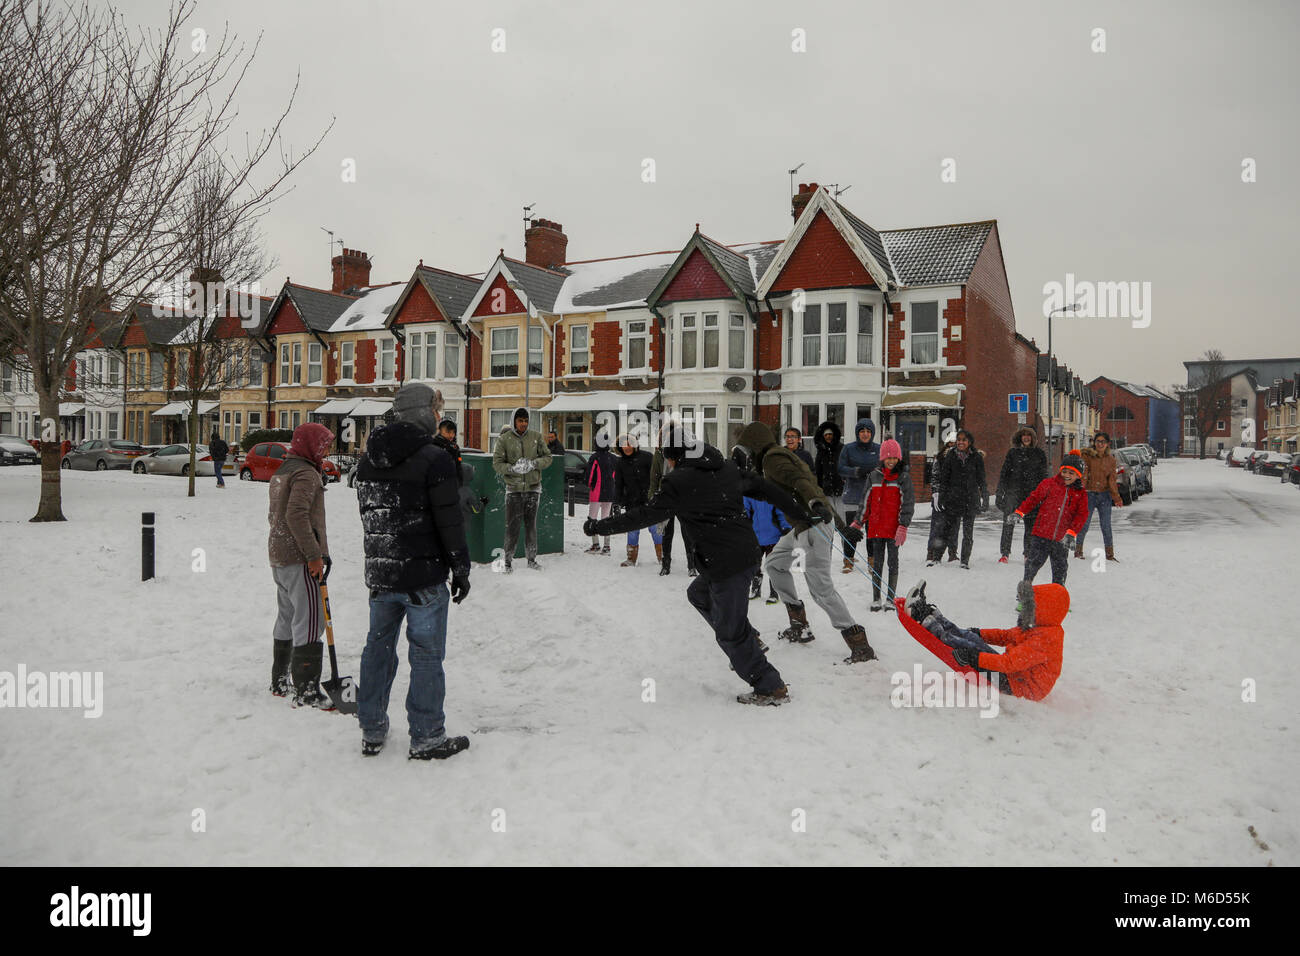 Cardiff, Wales, UK. 2nd Mar, 2018. Cardiff residents enjoy the snow outside the Shri Swaminarayan Mandir, Hindu temple in Grangetown, Cardiff, Following a night of heavy snow and blizzard conditions. Cardiff has been given a red weather alert due to Storm Emma, known also as the Beast from the East. Further snow and bad weather is forecasted throughout the night. Credit: Haydn Denman/Alamy Live News Stock Photo